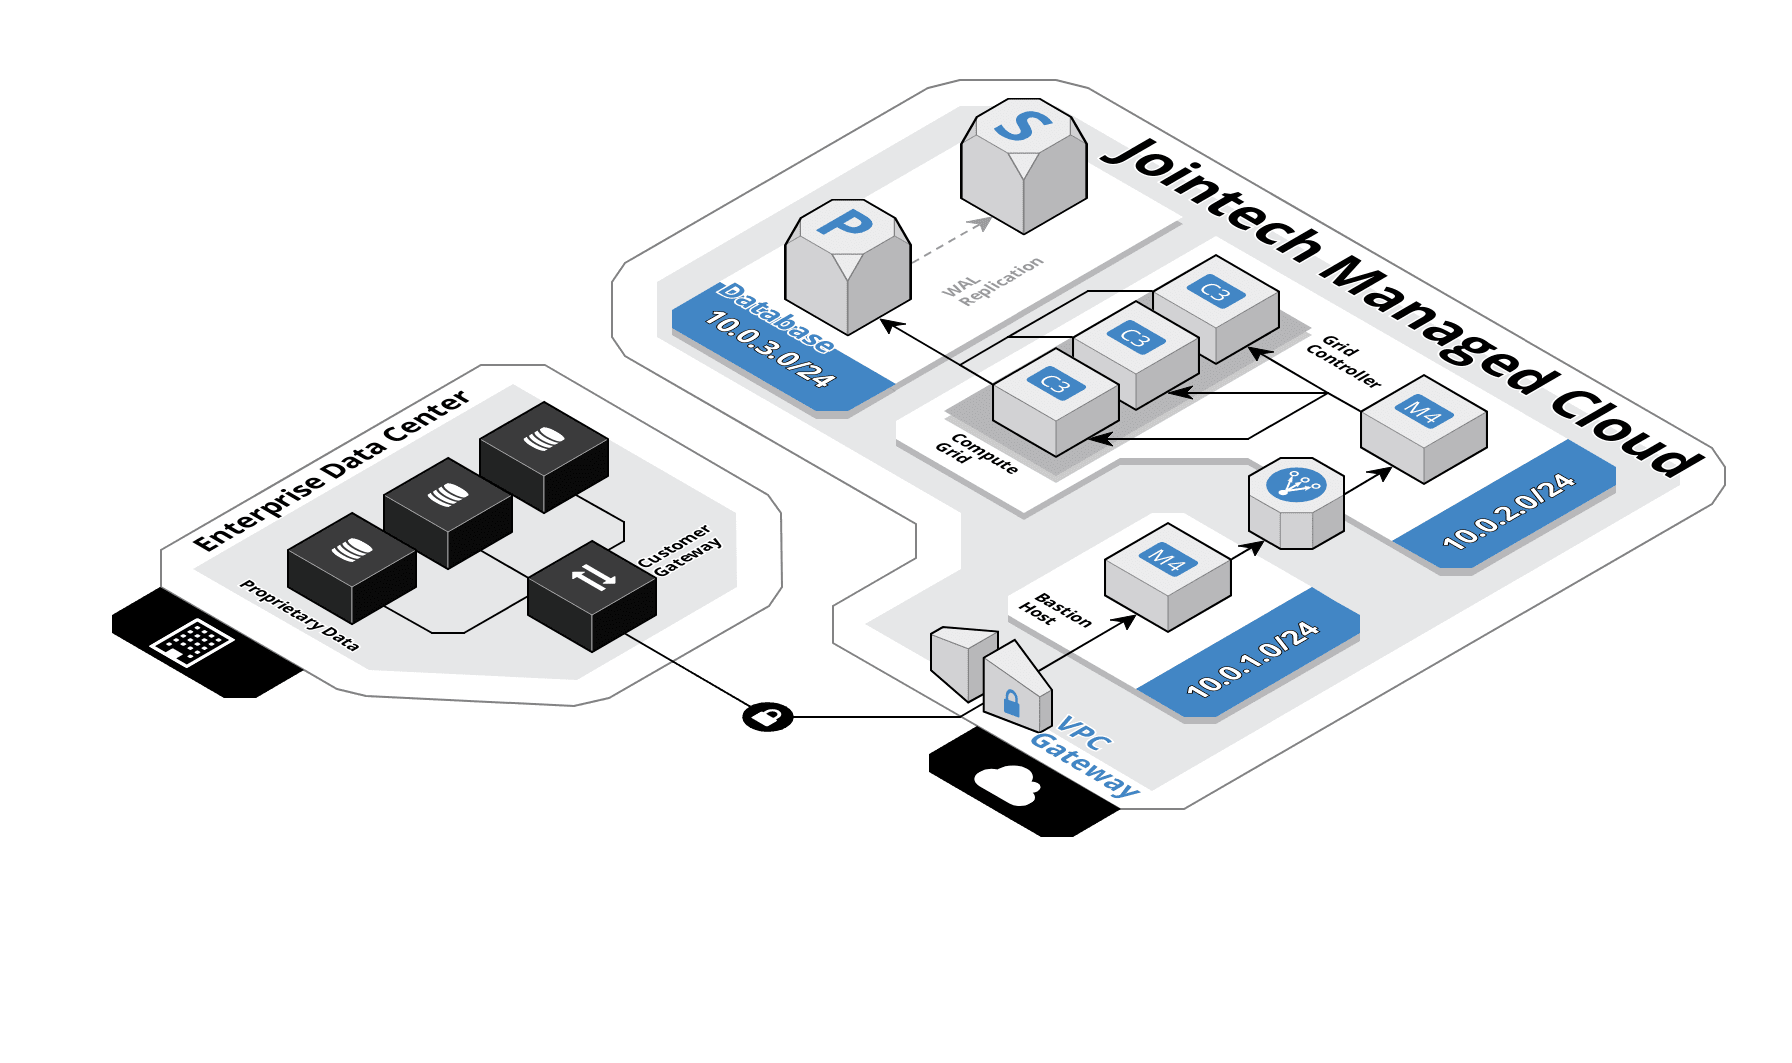 Stylized image of two cloud locations, Jointech Managed Cloud and Enterprise Data Center, connected via a secure connection.